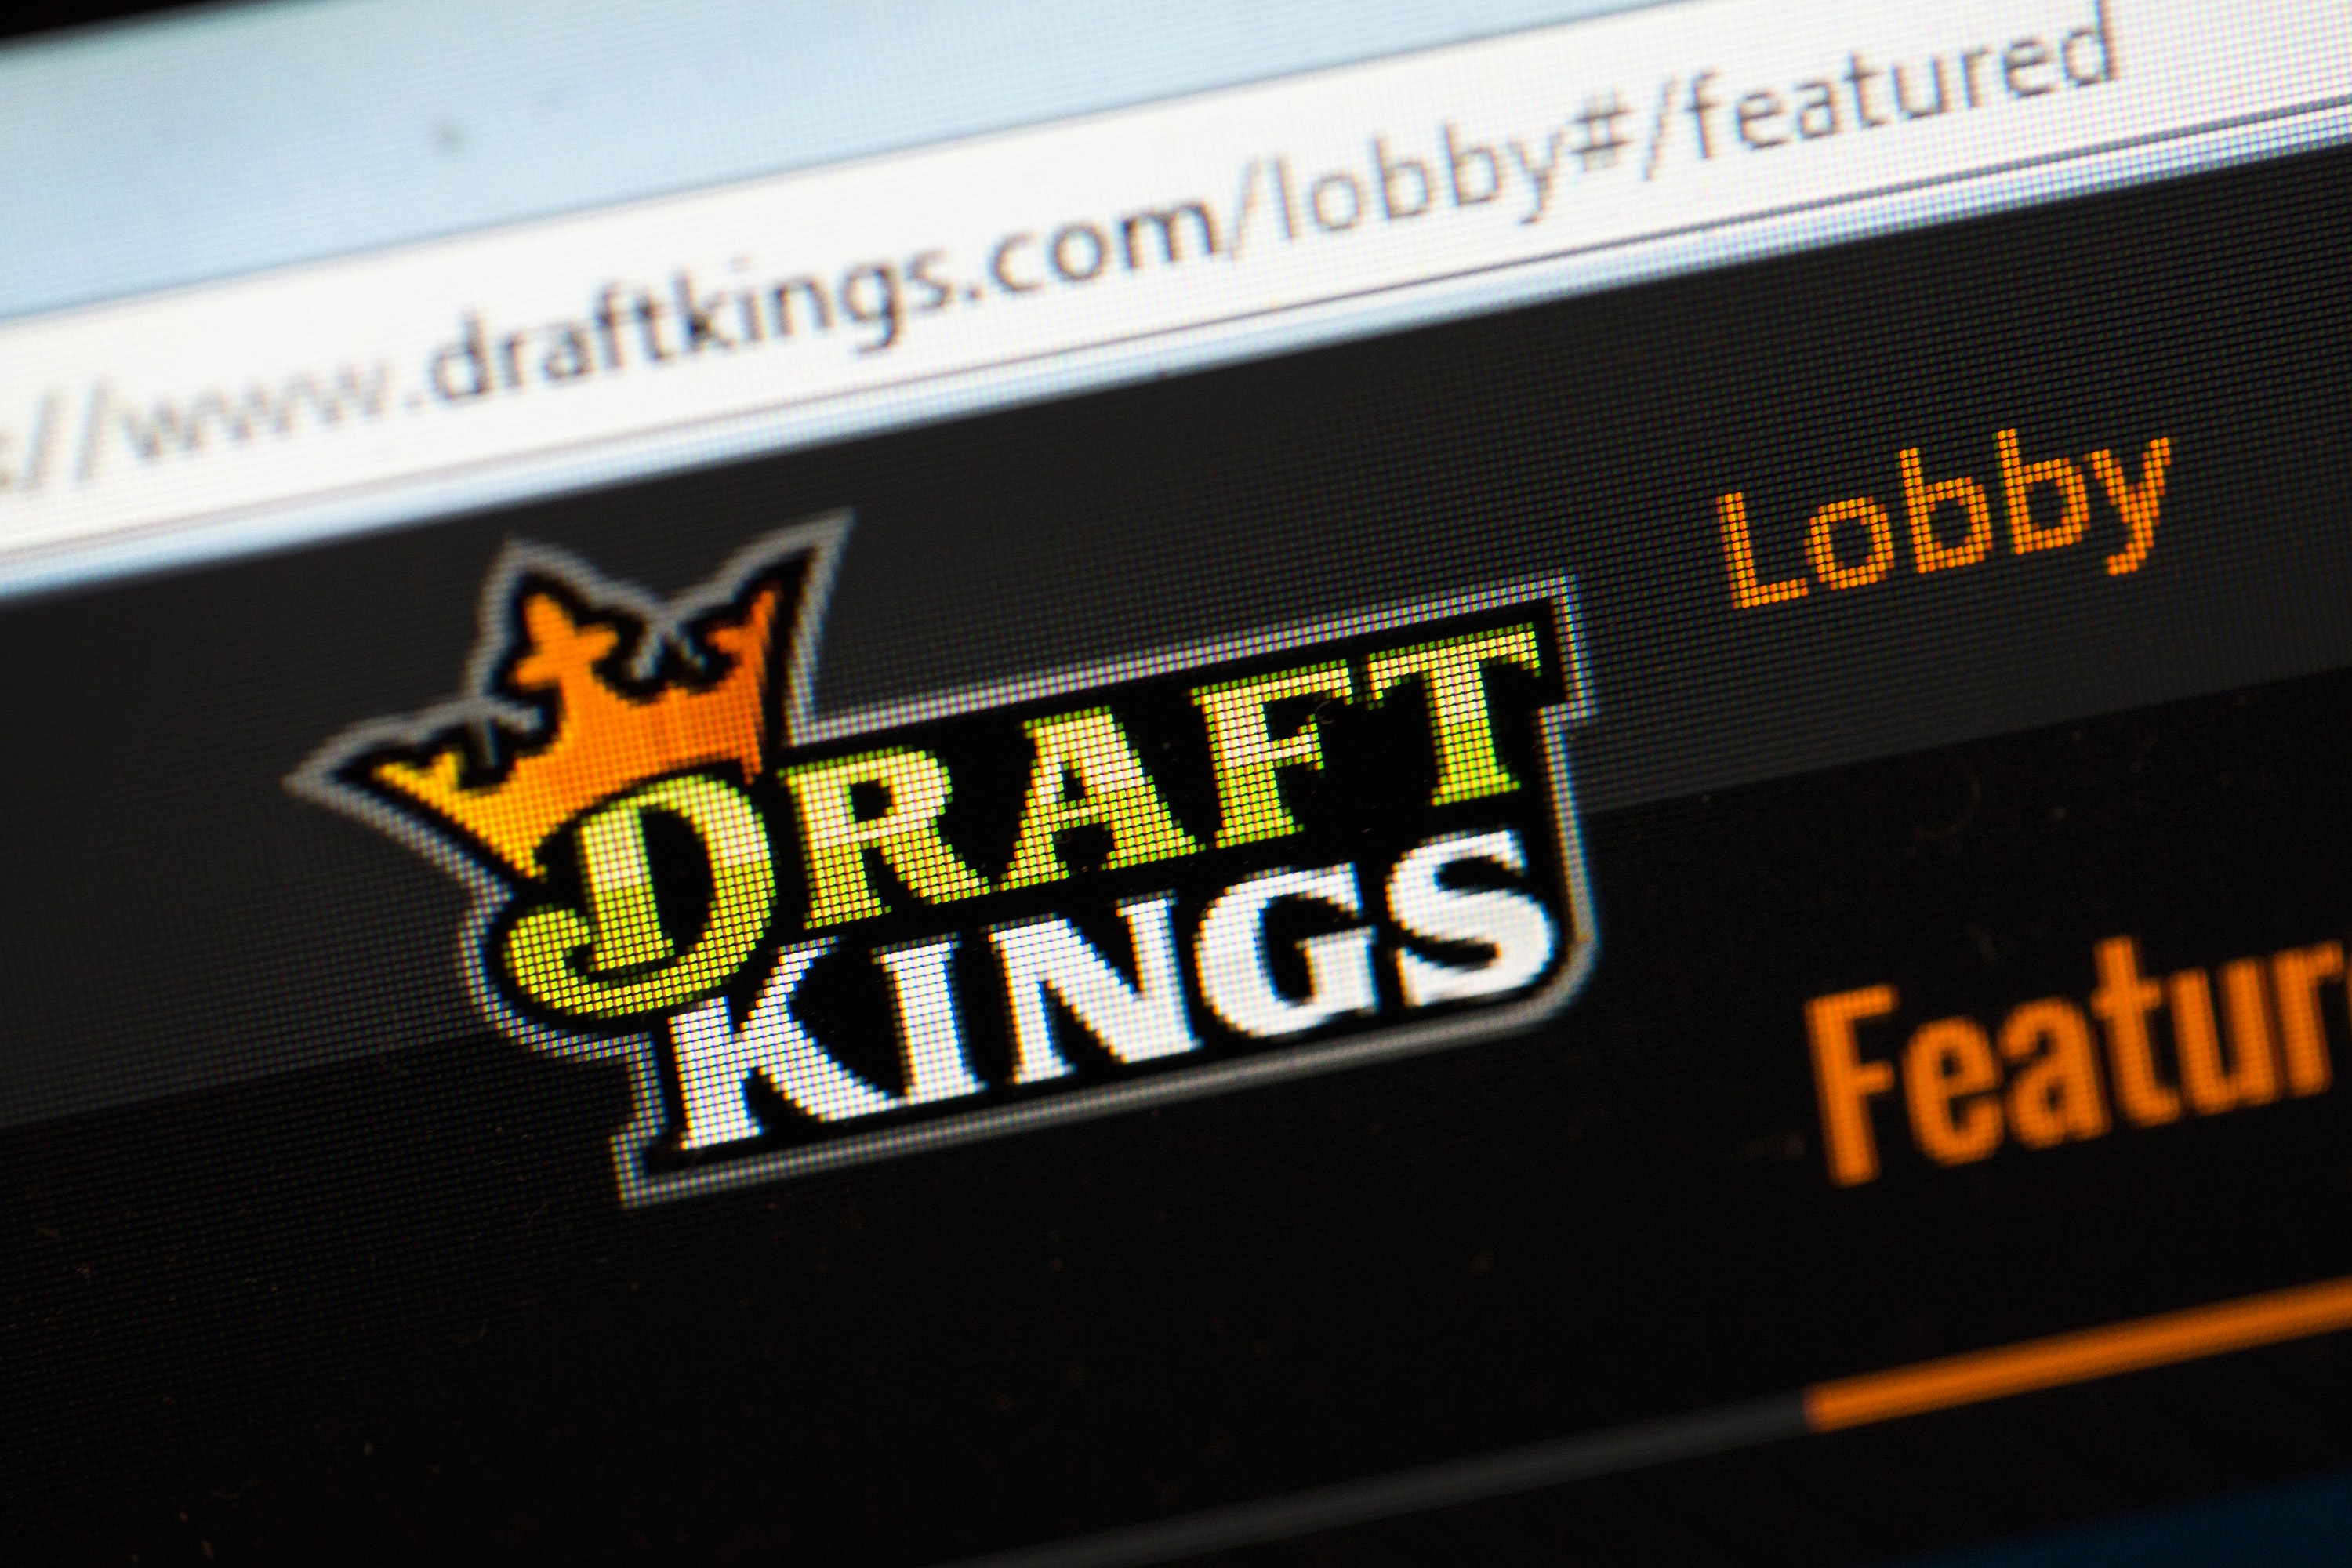 The fantasy sports website DraftKings is shown on Oct. 16, 2015 in Chicago. (Scott Olson—Getty Images)